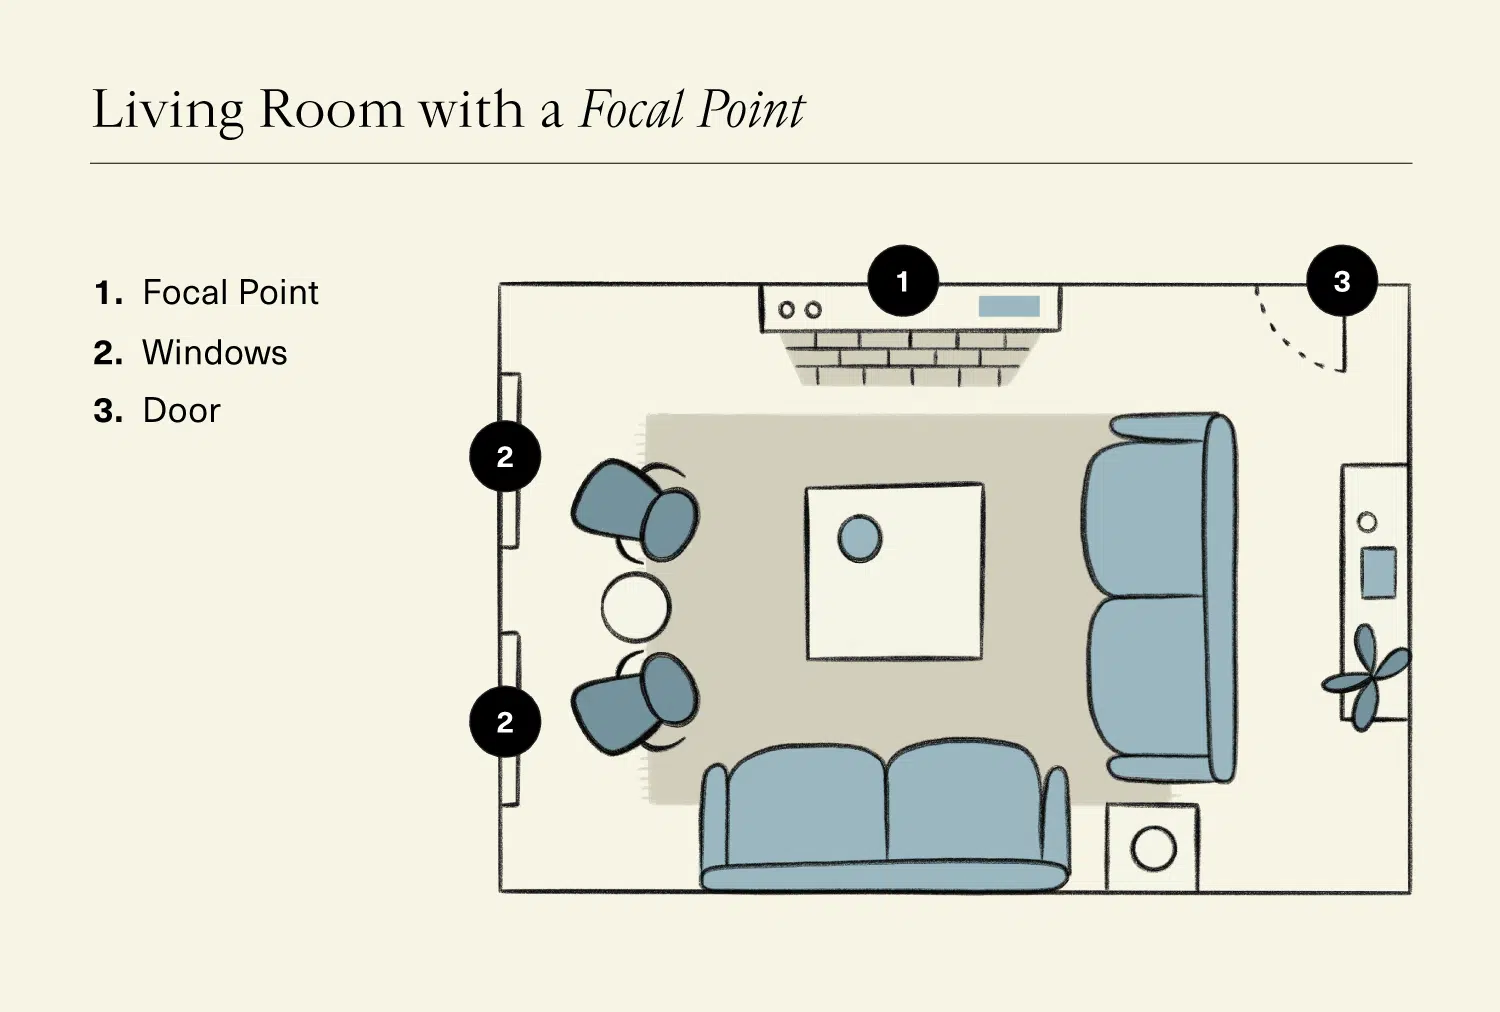 How to Arrange Furniture: Illustration of Living Room with Focal Point